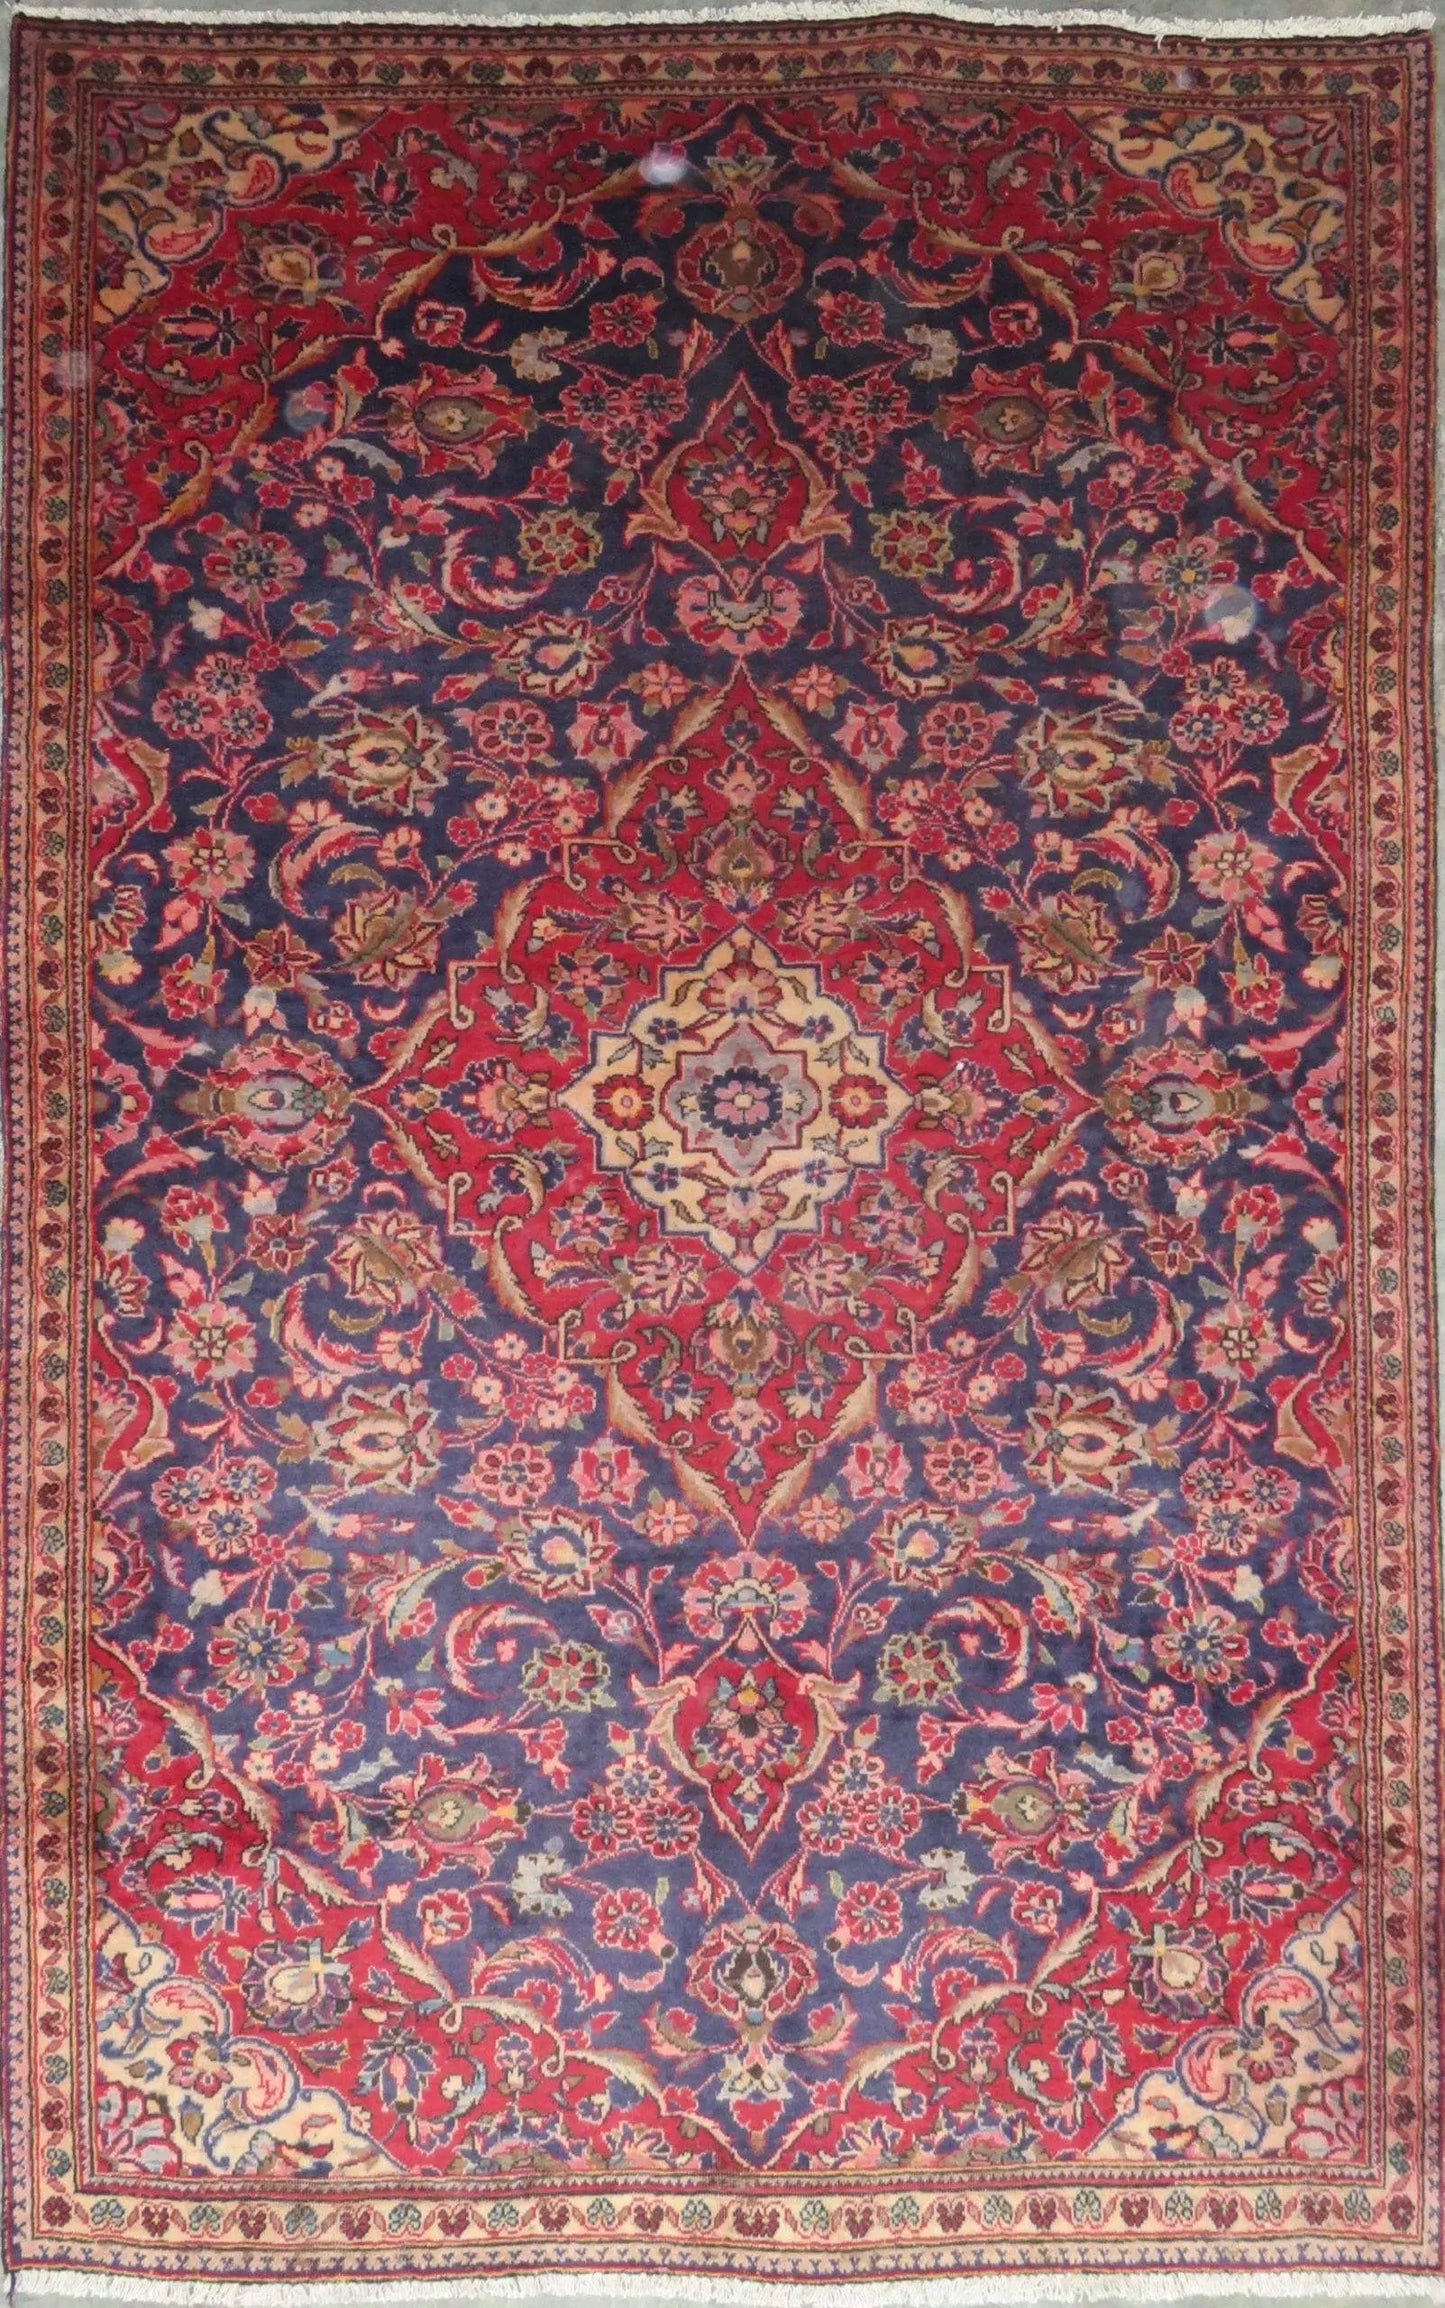 Hand-Knotted Persian Wool Rug _ Luxurious Vintage Design, 7'5" x 4'7", Artisan Crafted